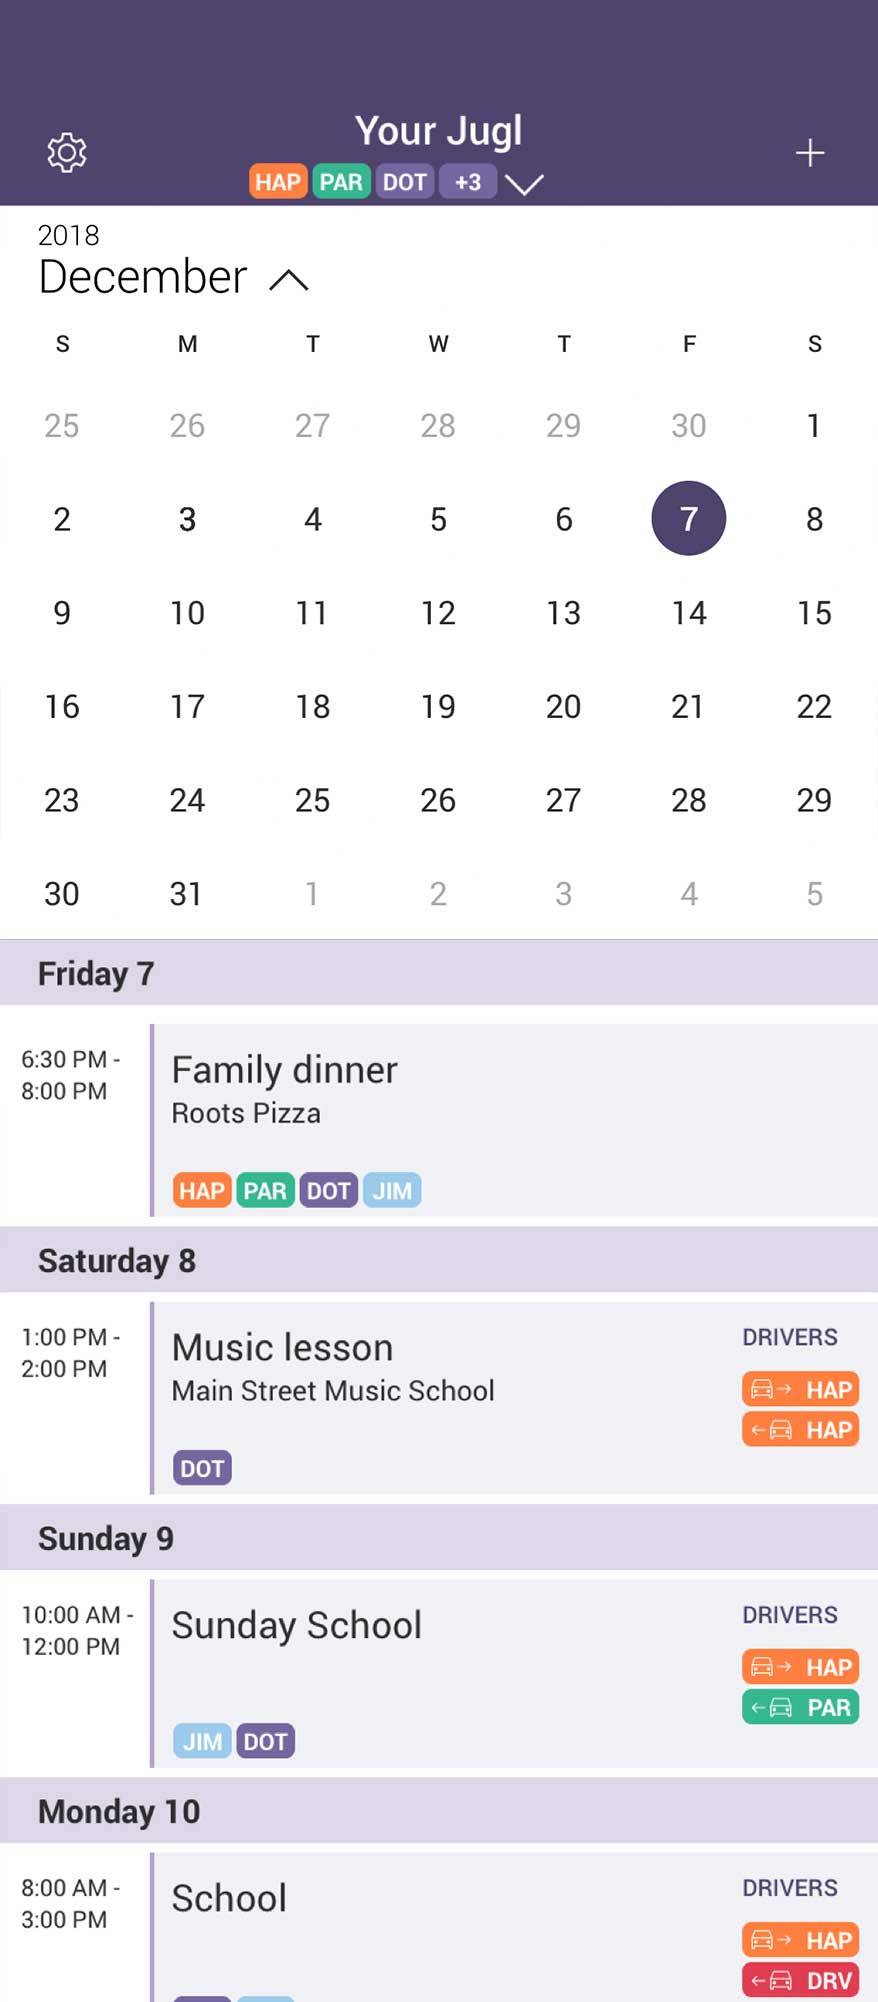 Calendar view of the Jugl mobile app. Includes events for the next four days.